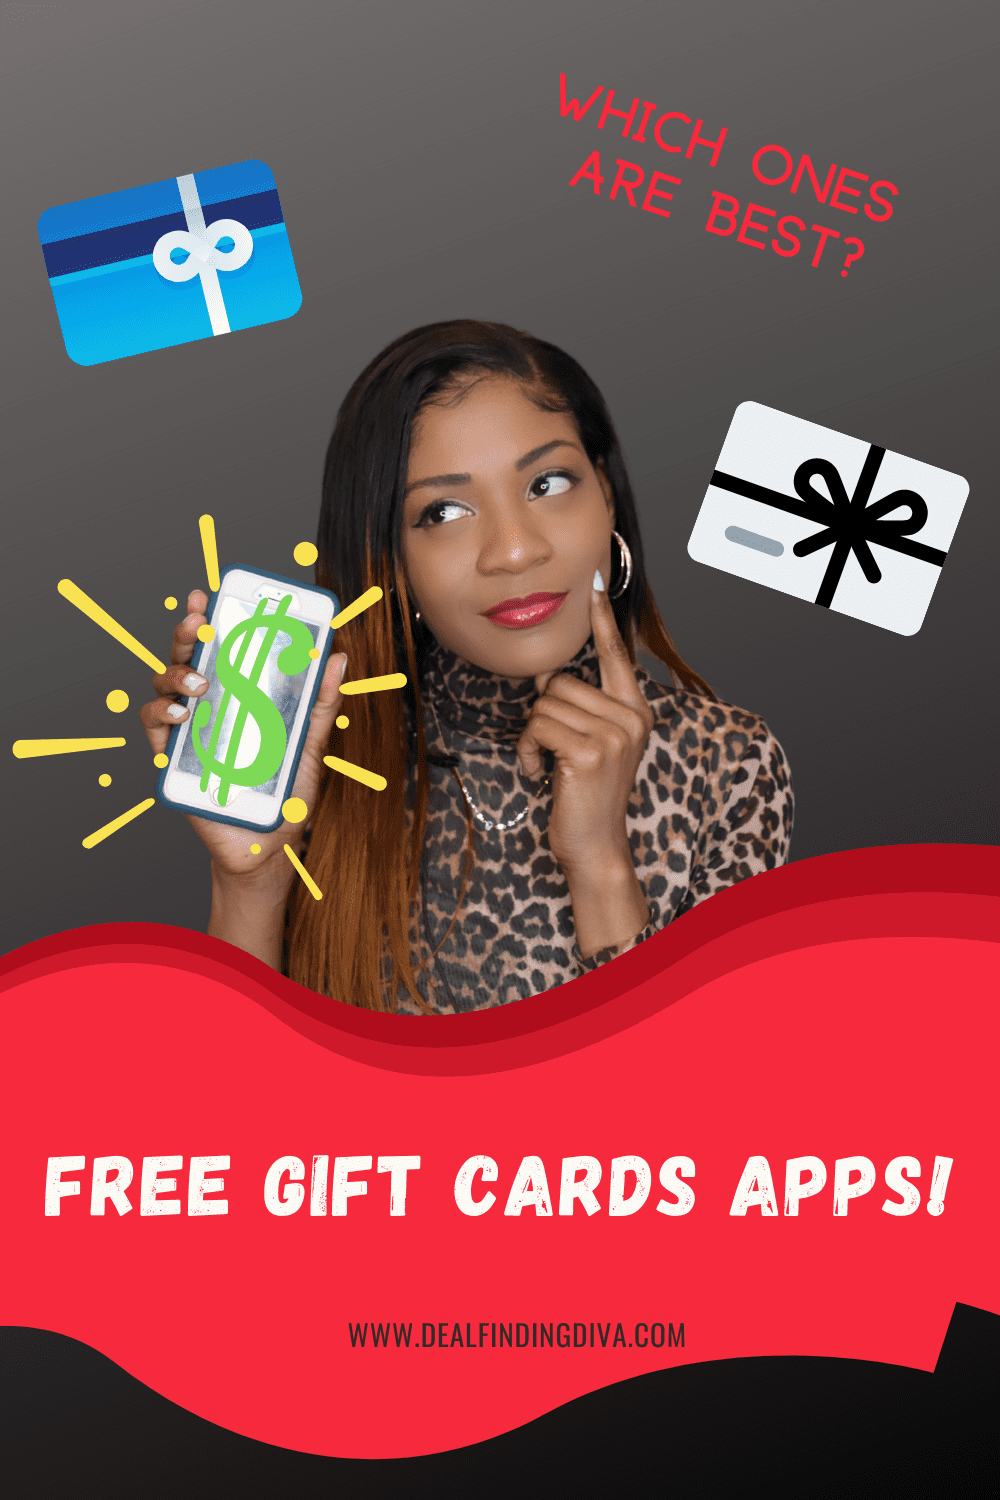 THE BEST APPS TO EARN FREE GIFT CARDS IN 2021! CASH TOO!